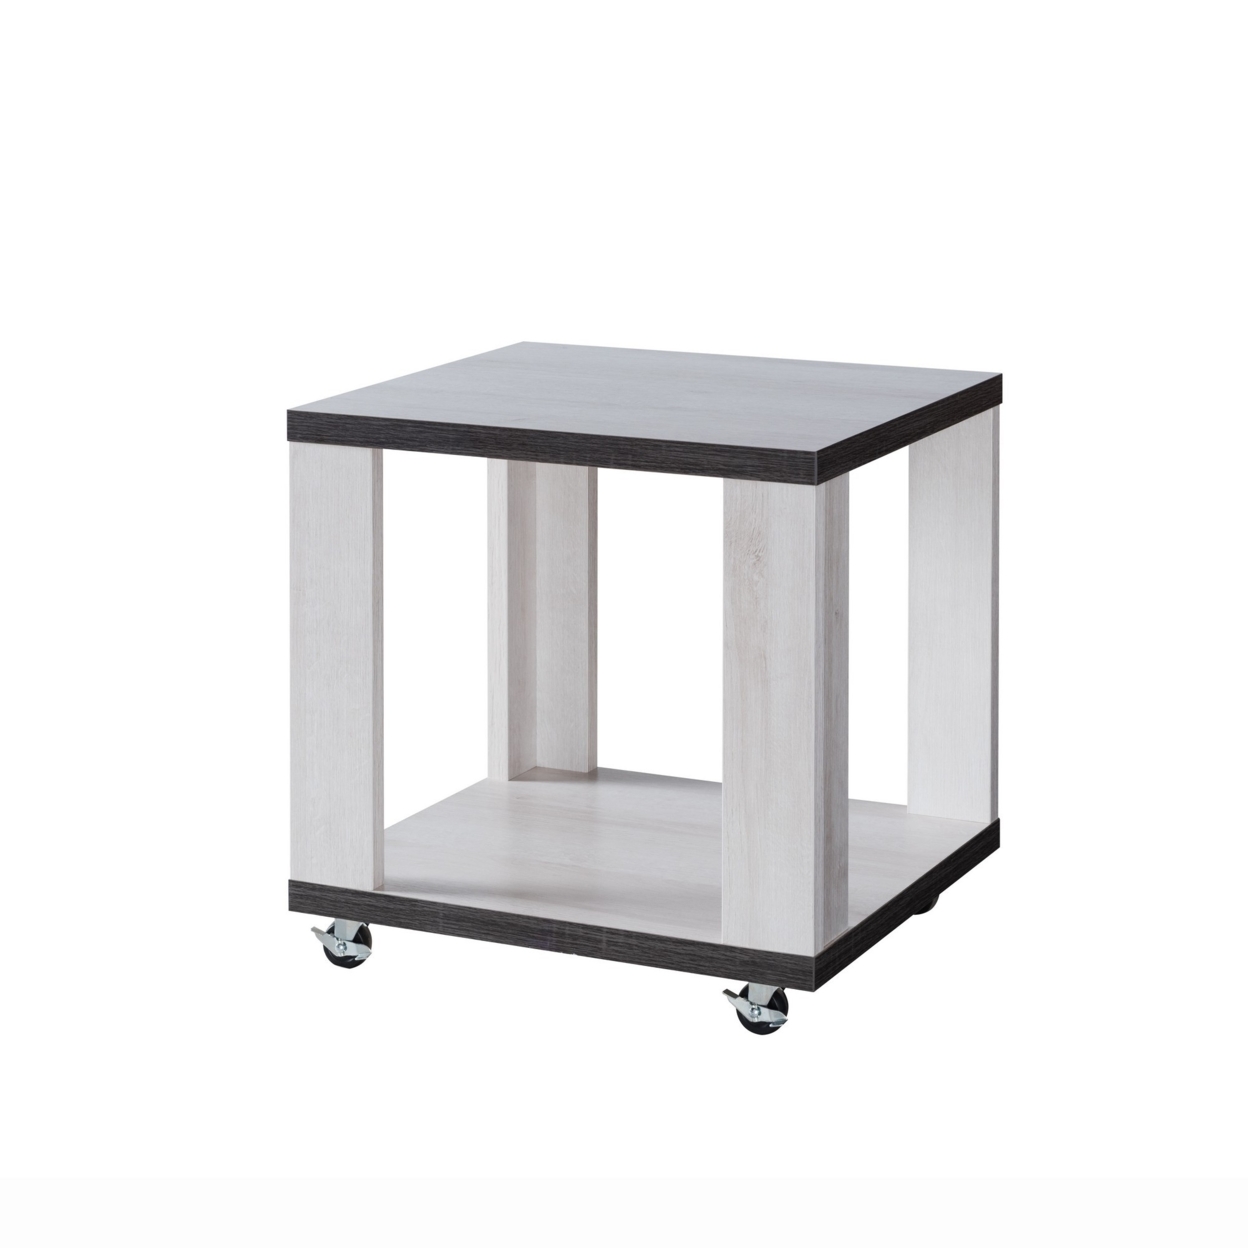 End Table With Wooden Open Bottom Shelf, White And Gray- Saltoro Sherpi